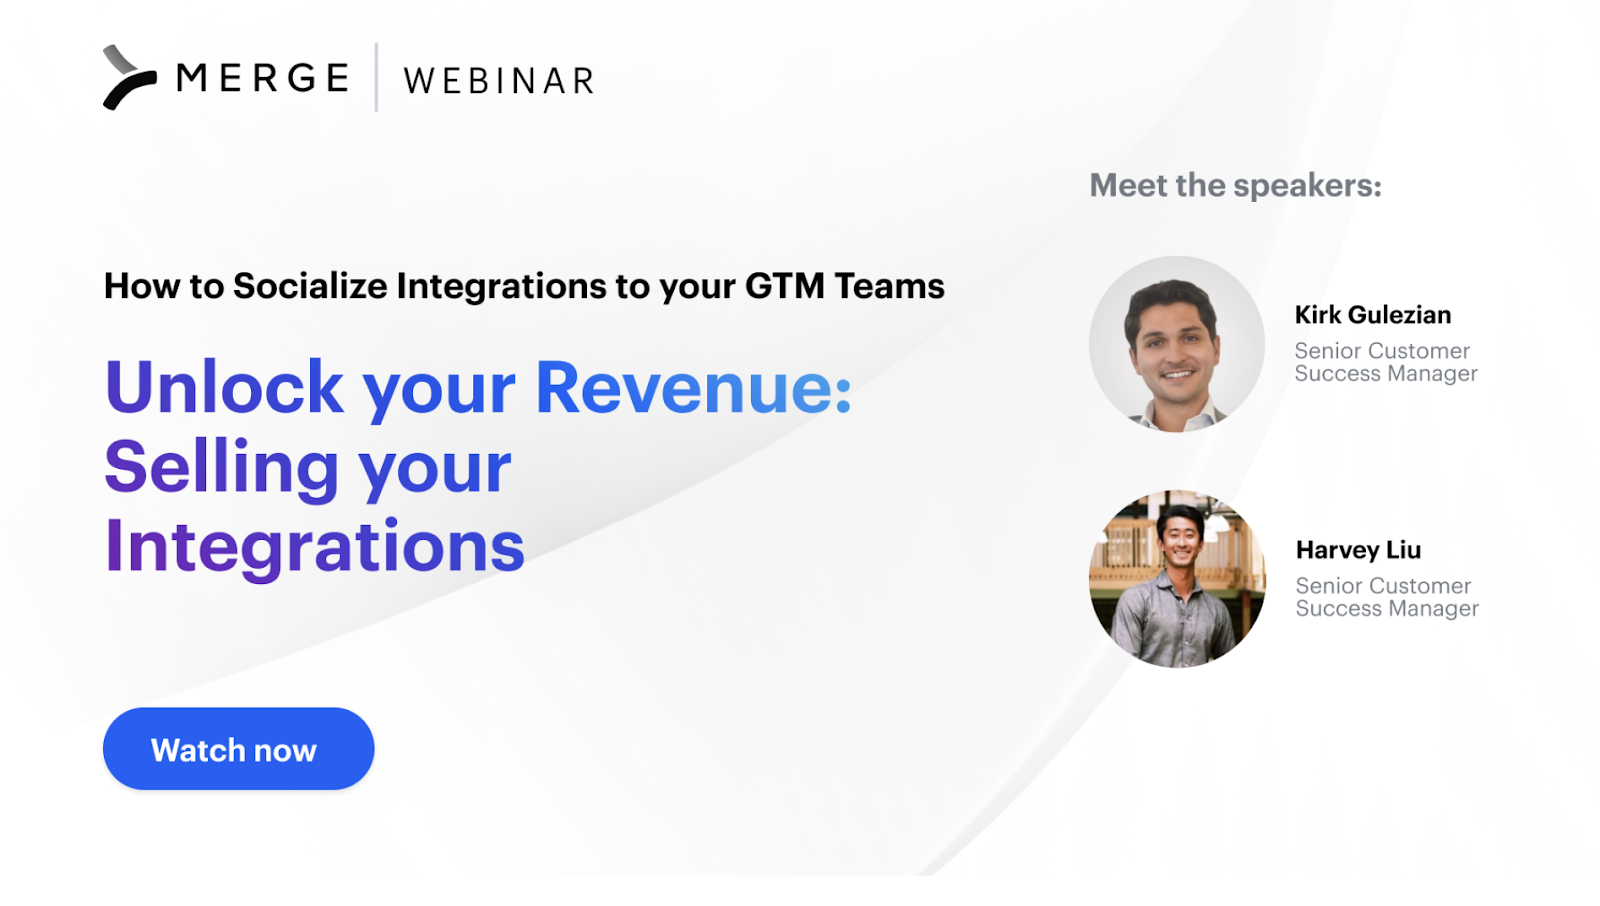 Image that promotes Merge's webinar on selling integrations